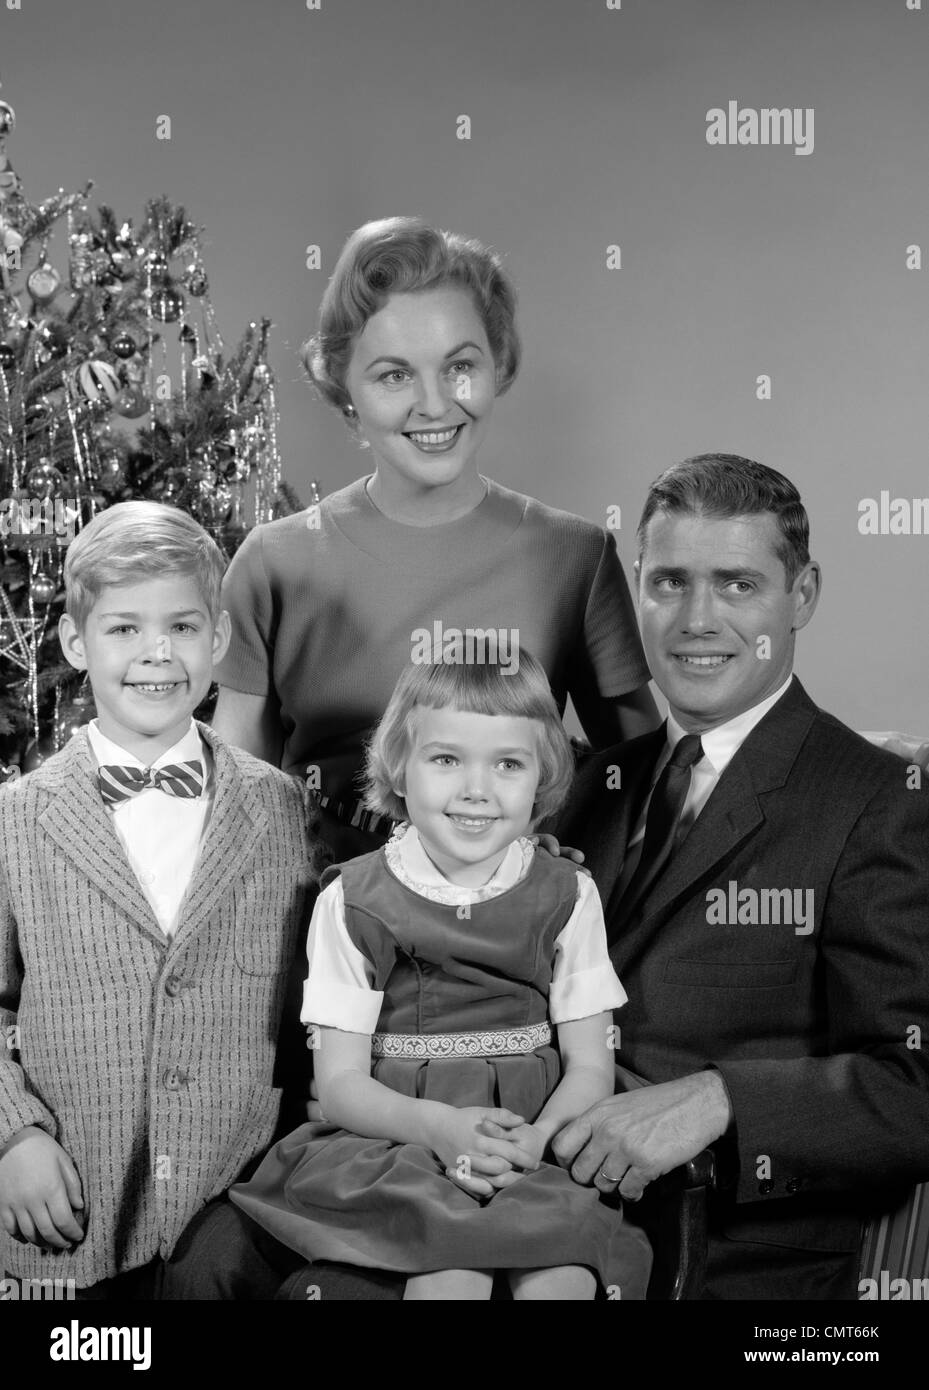 1950s 1960s FAMILY PORTRAIT SMILING FATHER MOTHER DAUGHTER SON SITTING TOGETHER IN FRONT OF INDOOR CHRISTMAS TREE Stock Photo